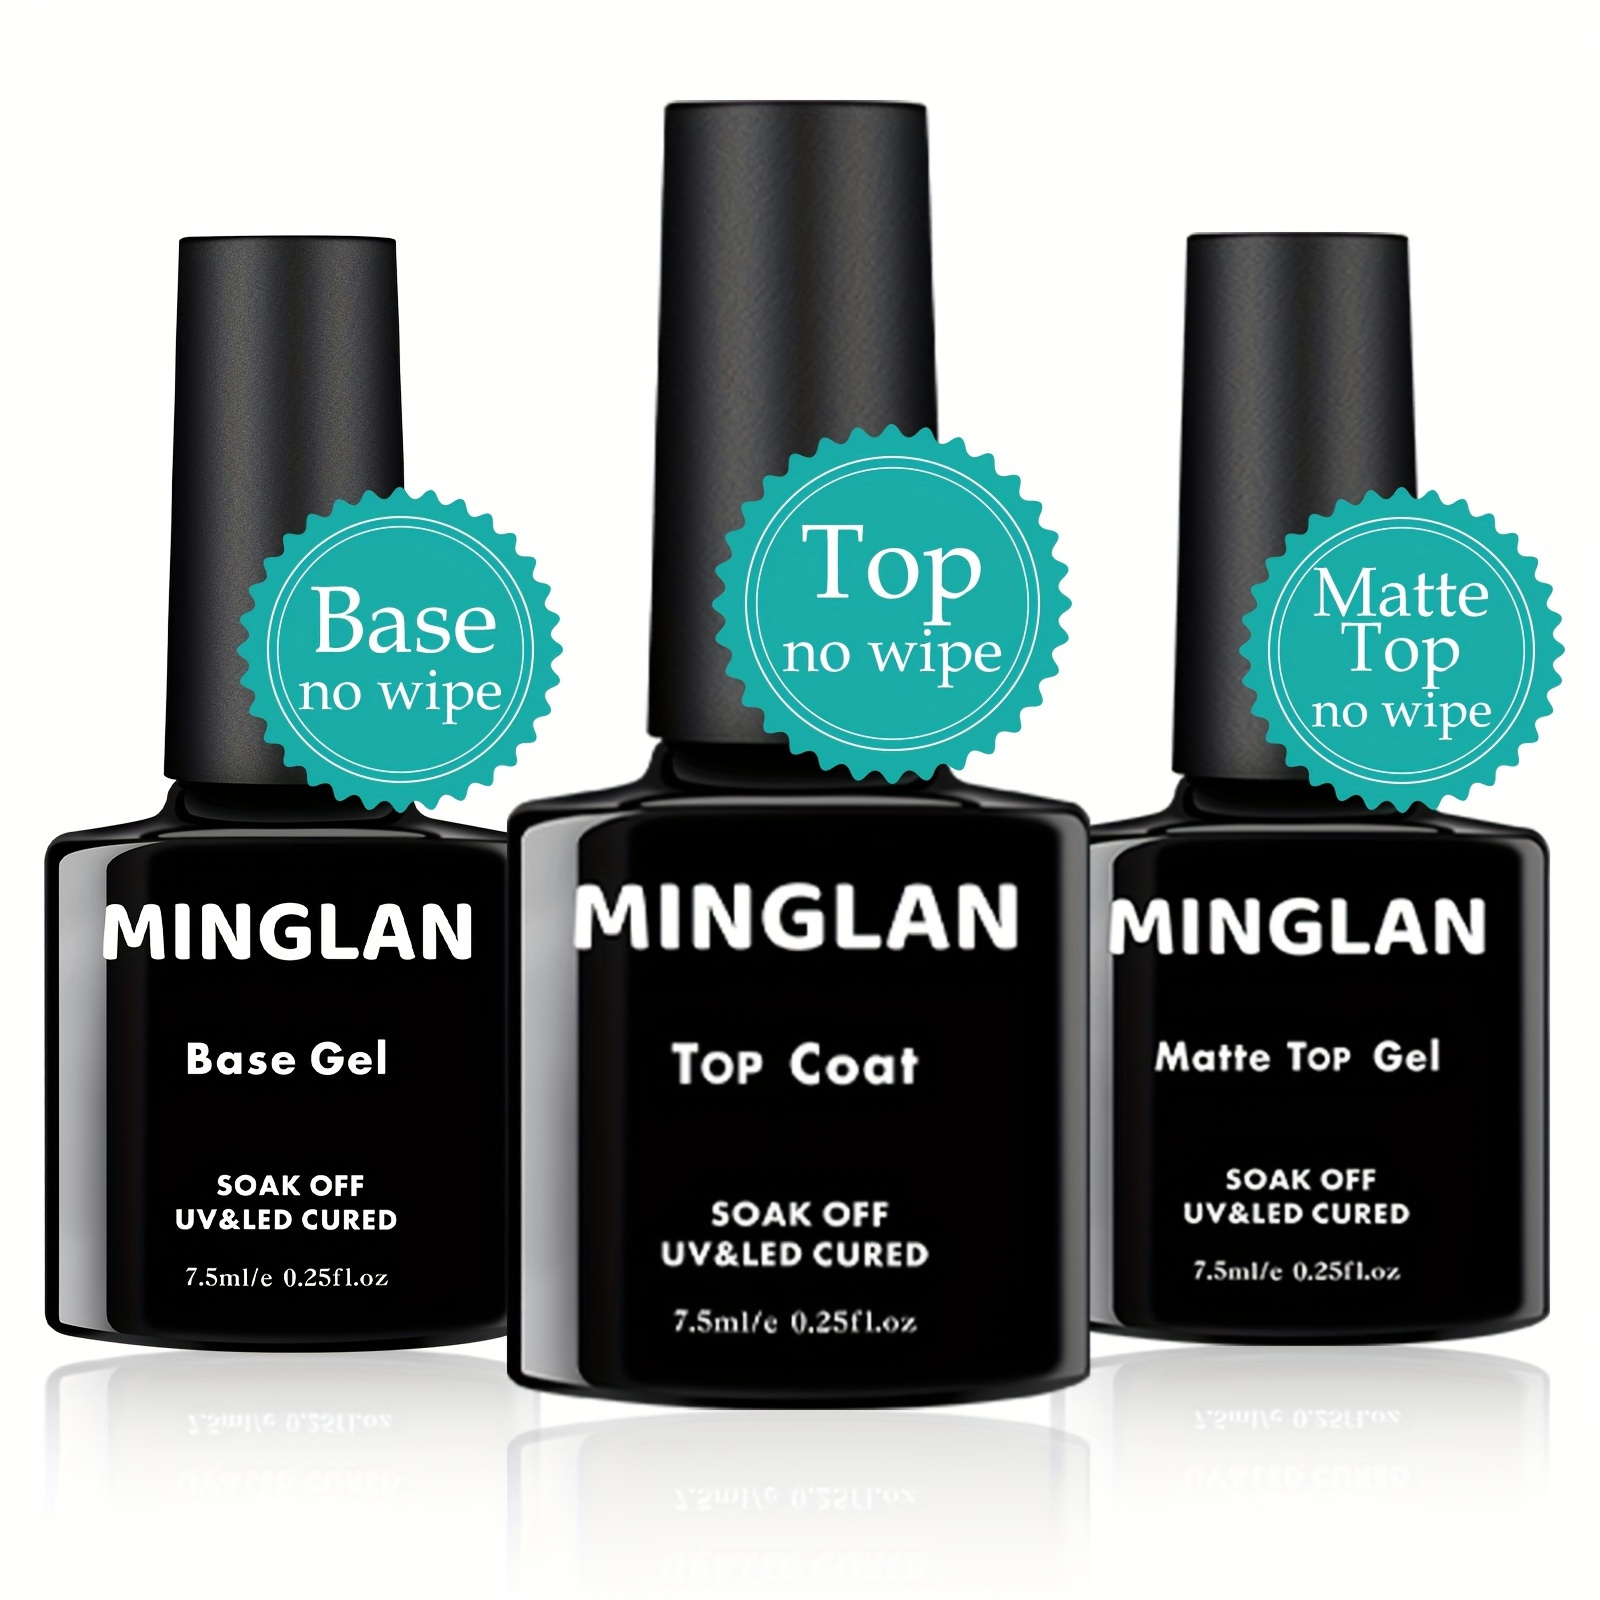 

1/3pcs Gel Top Coat, Matte Top Coat And Base Coat Set For Gel Nail Polish, No Wipe Matte & Shiny Top Coat, Long Lasting High Gloss And Matte Effects For Home Nail Salon Use